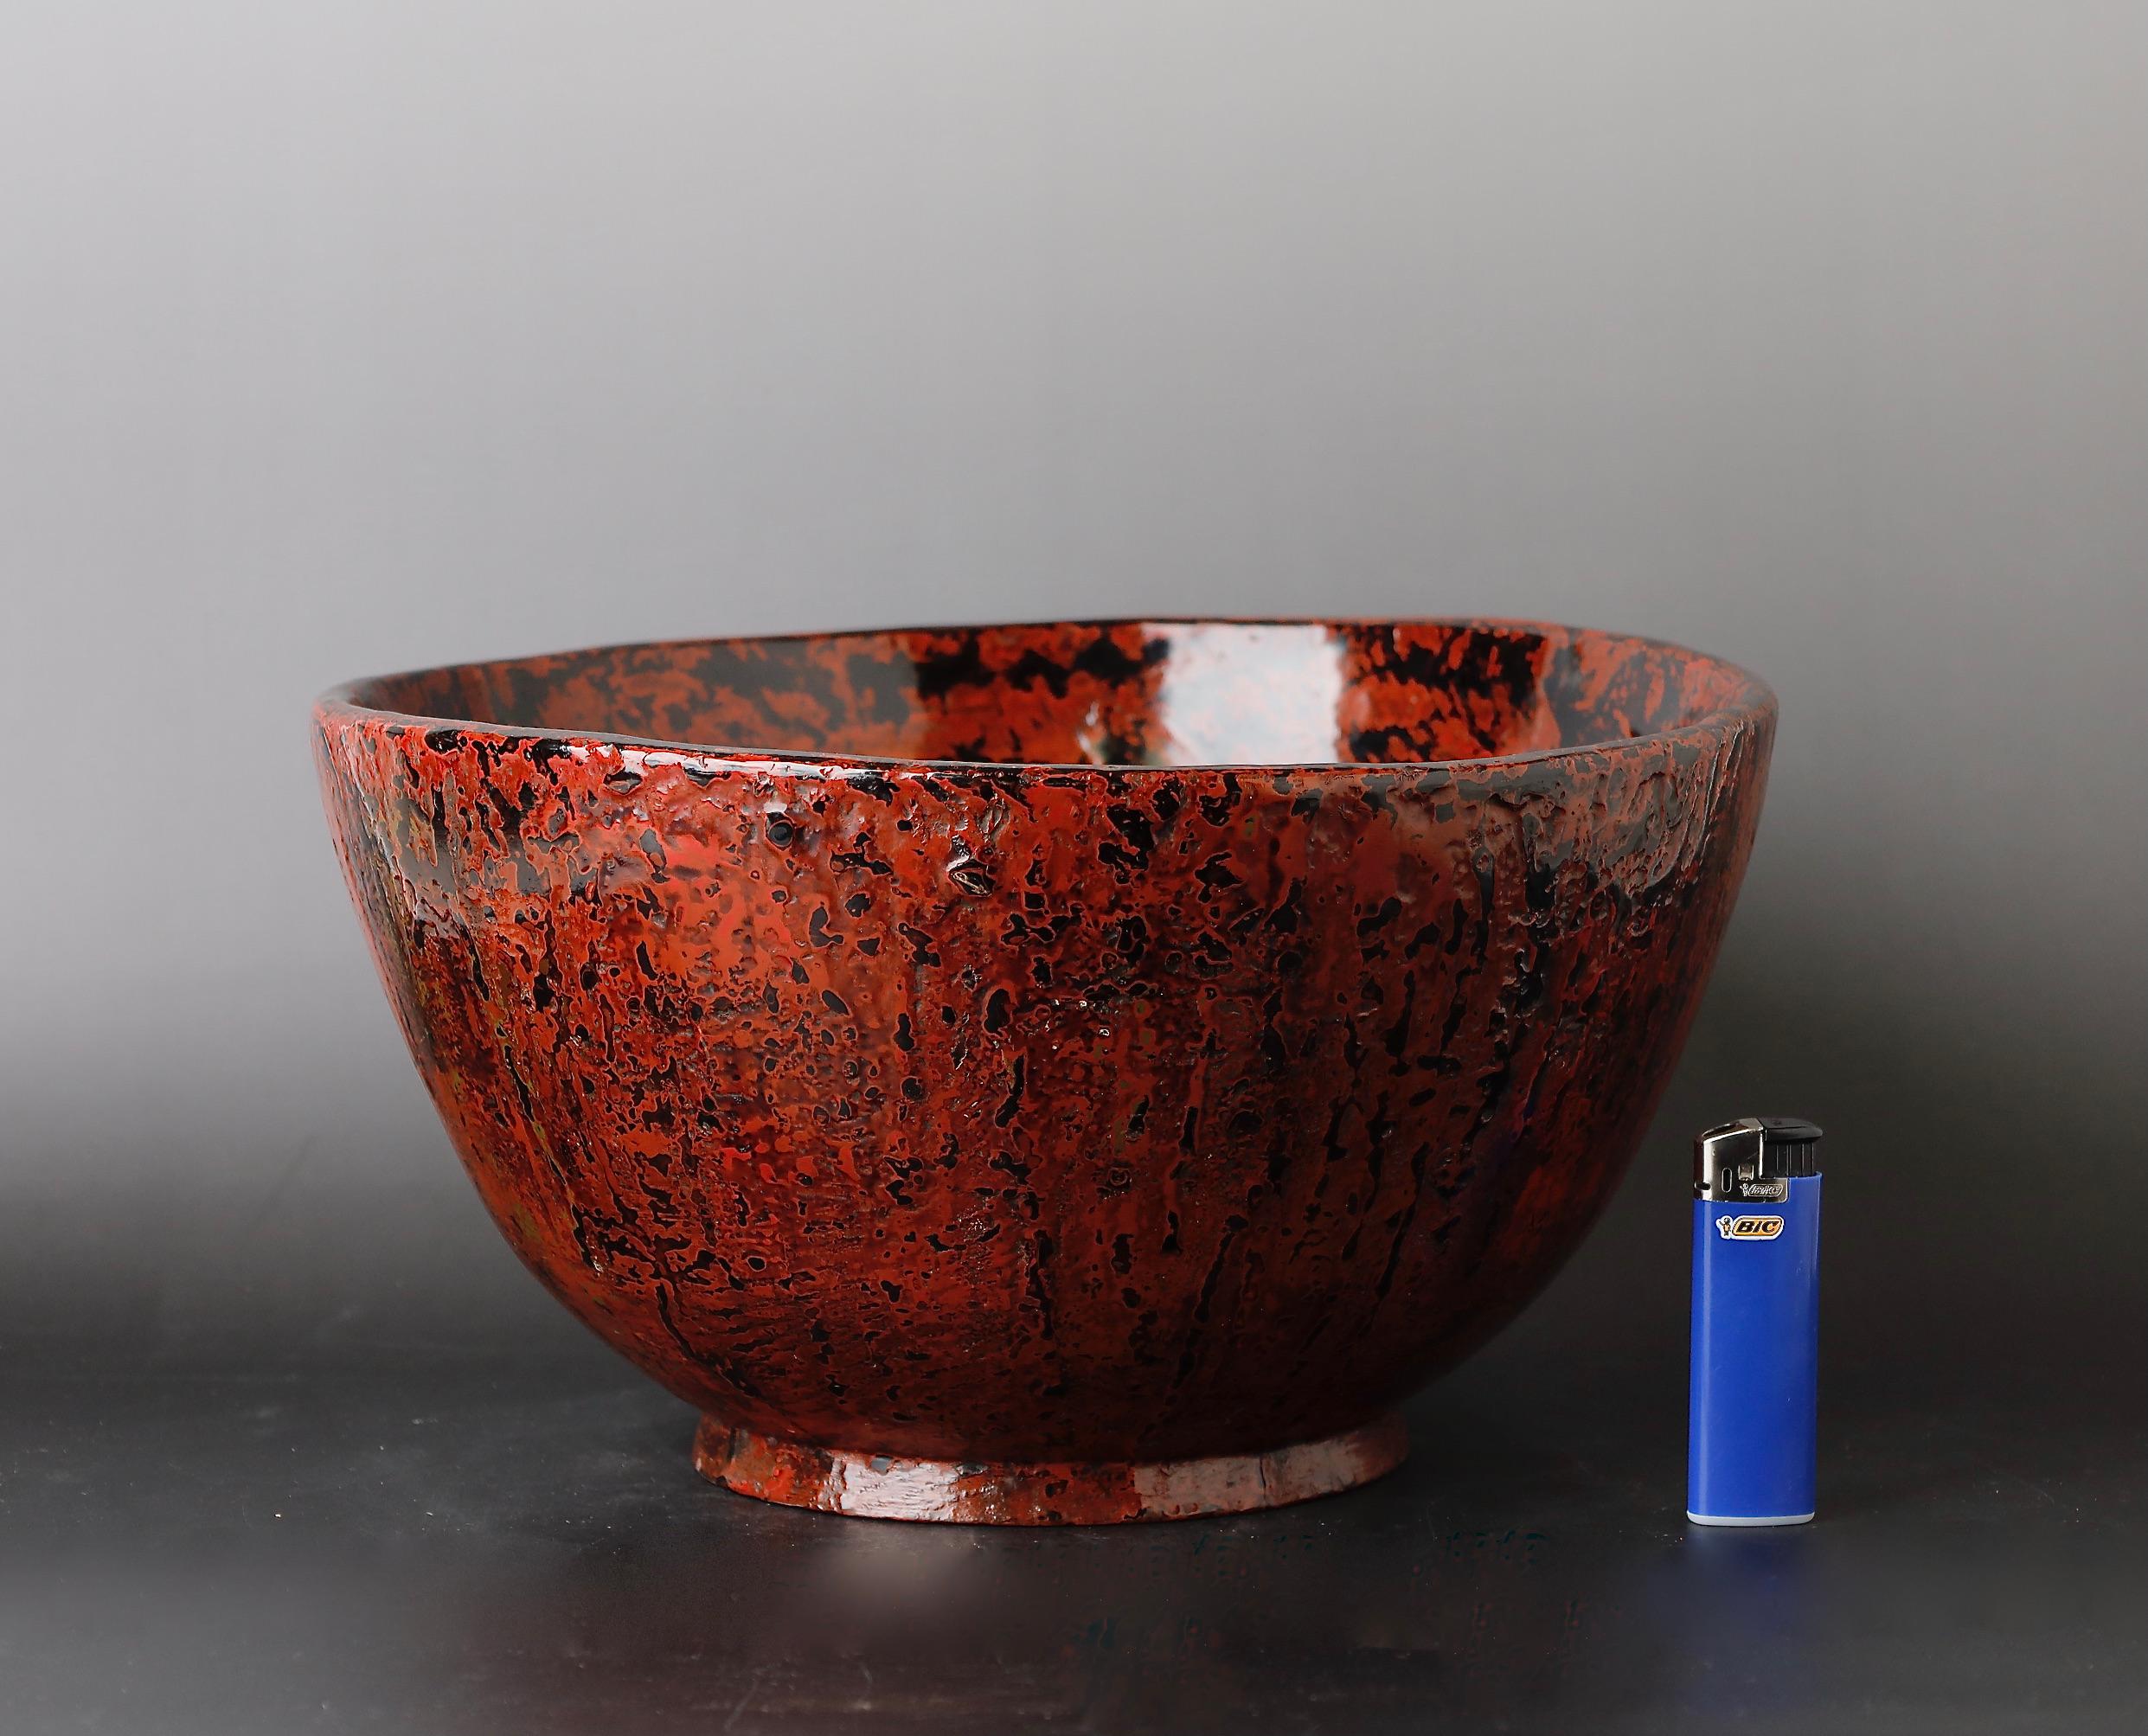 A Beautiful Kanshitsu Bachi Lacquer Mixing Bowl.

This beautiful Kanshitsu Bachi lacquer mixing bowl is a stunning example of Japanese craftsmanship. It is dated to the Showa period, 20th century, and is in good condition with some minor abrasions